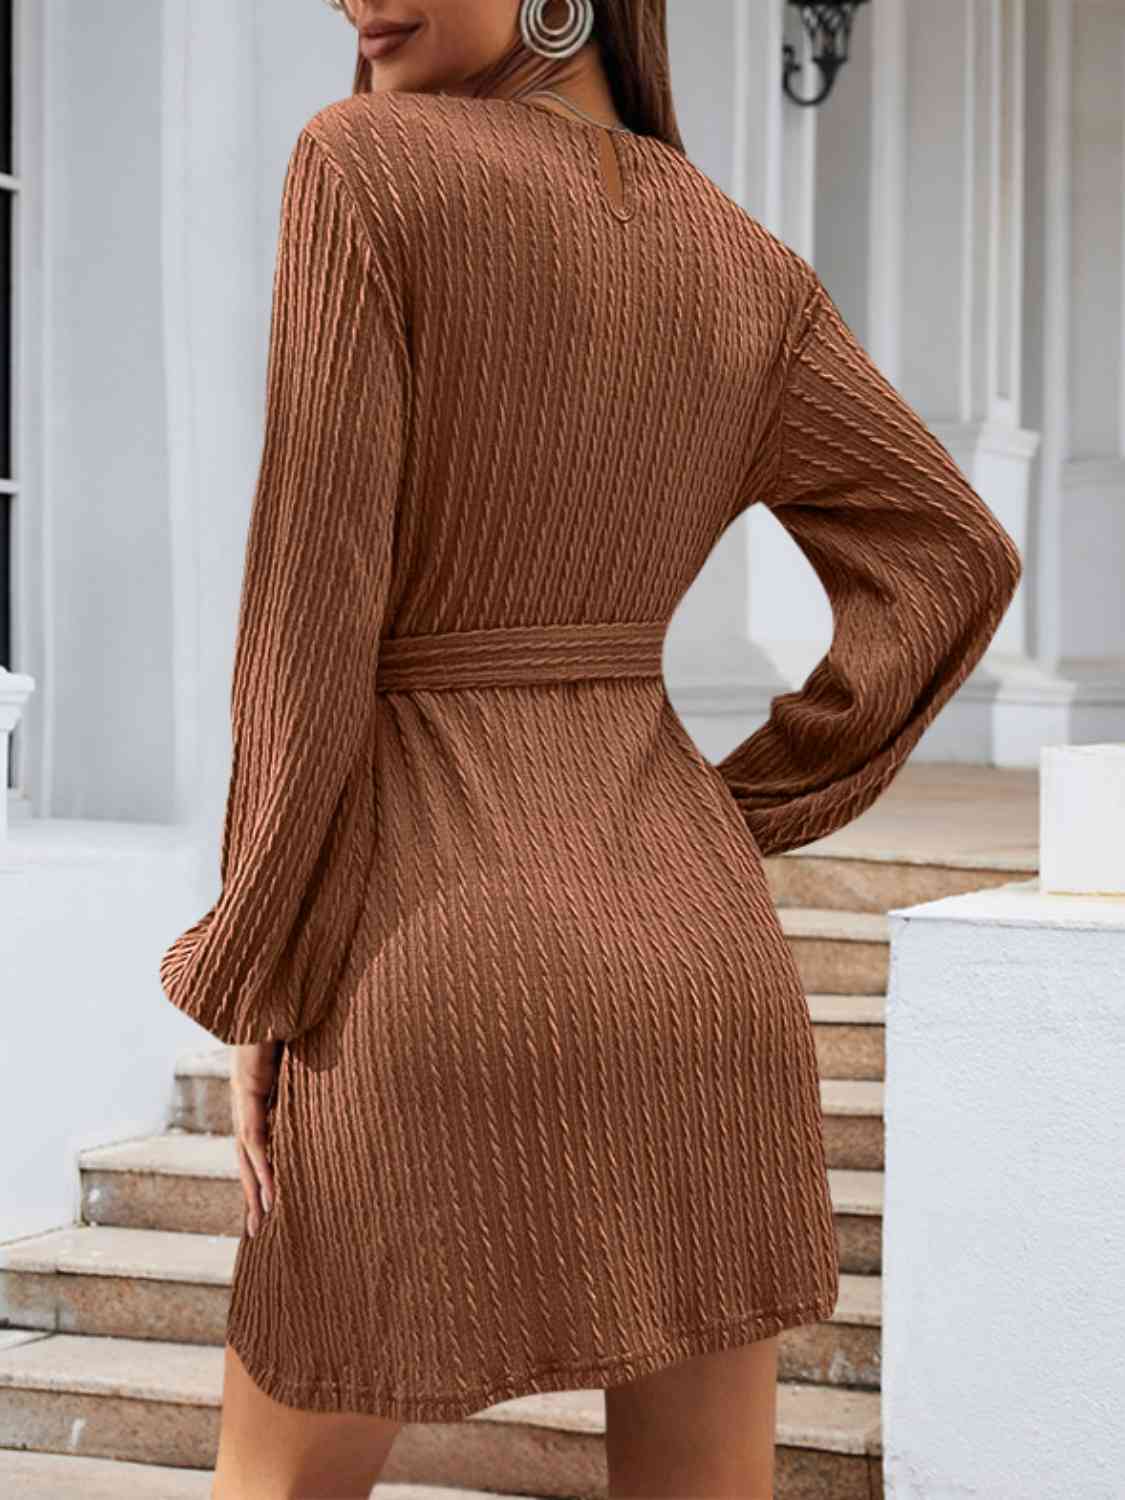 Round Neck Tie Front Long Sleeve Dress - All Dresses - Dresses - 2 - 2024